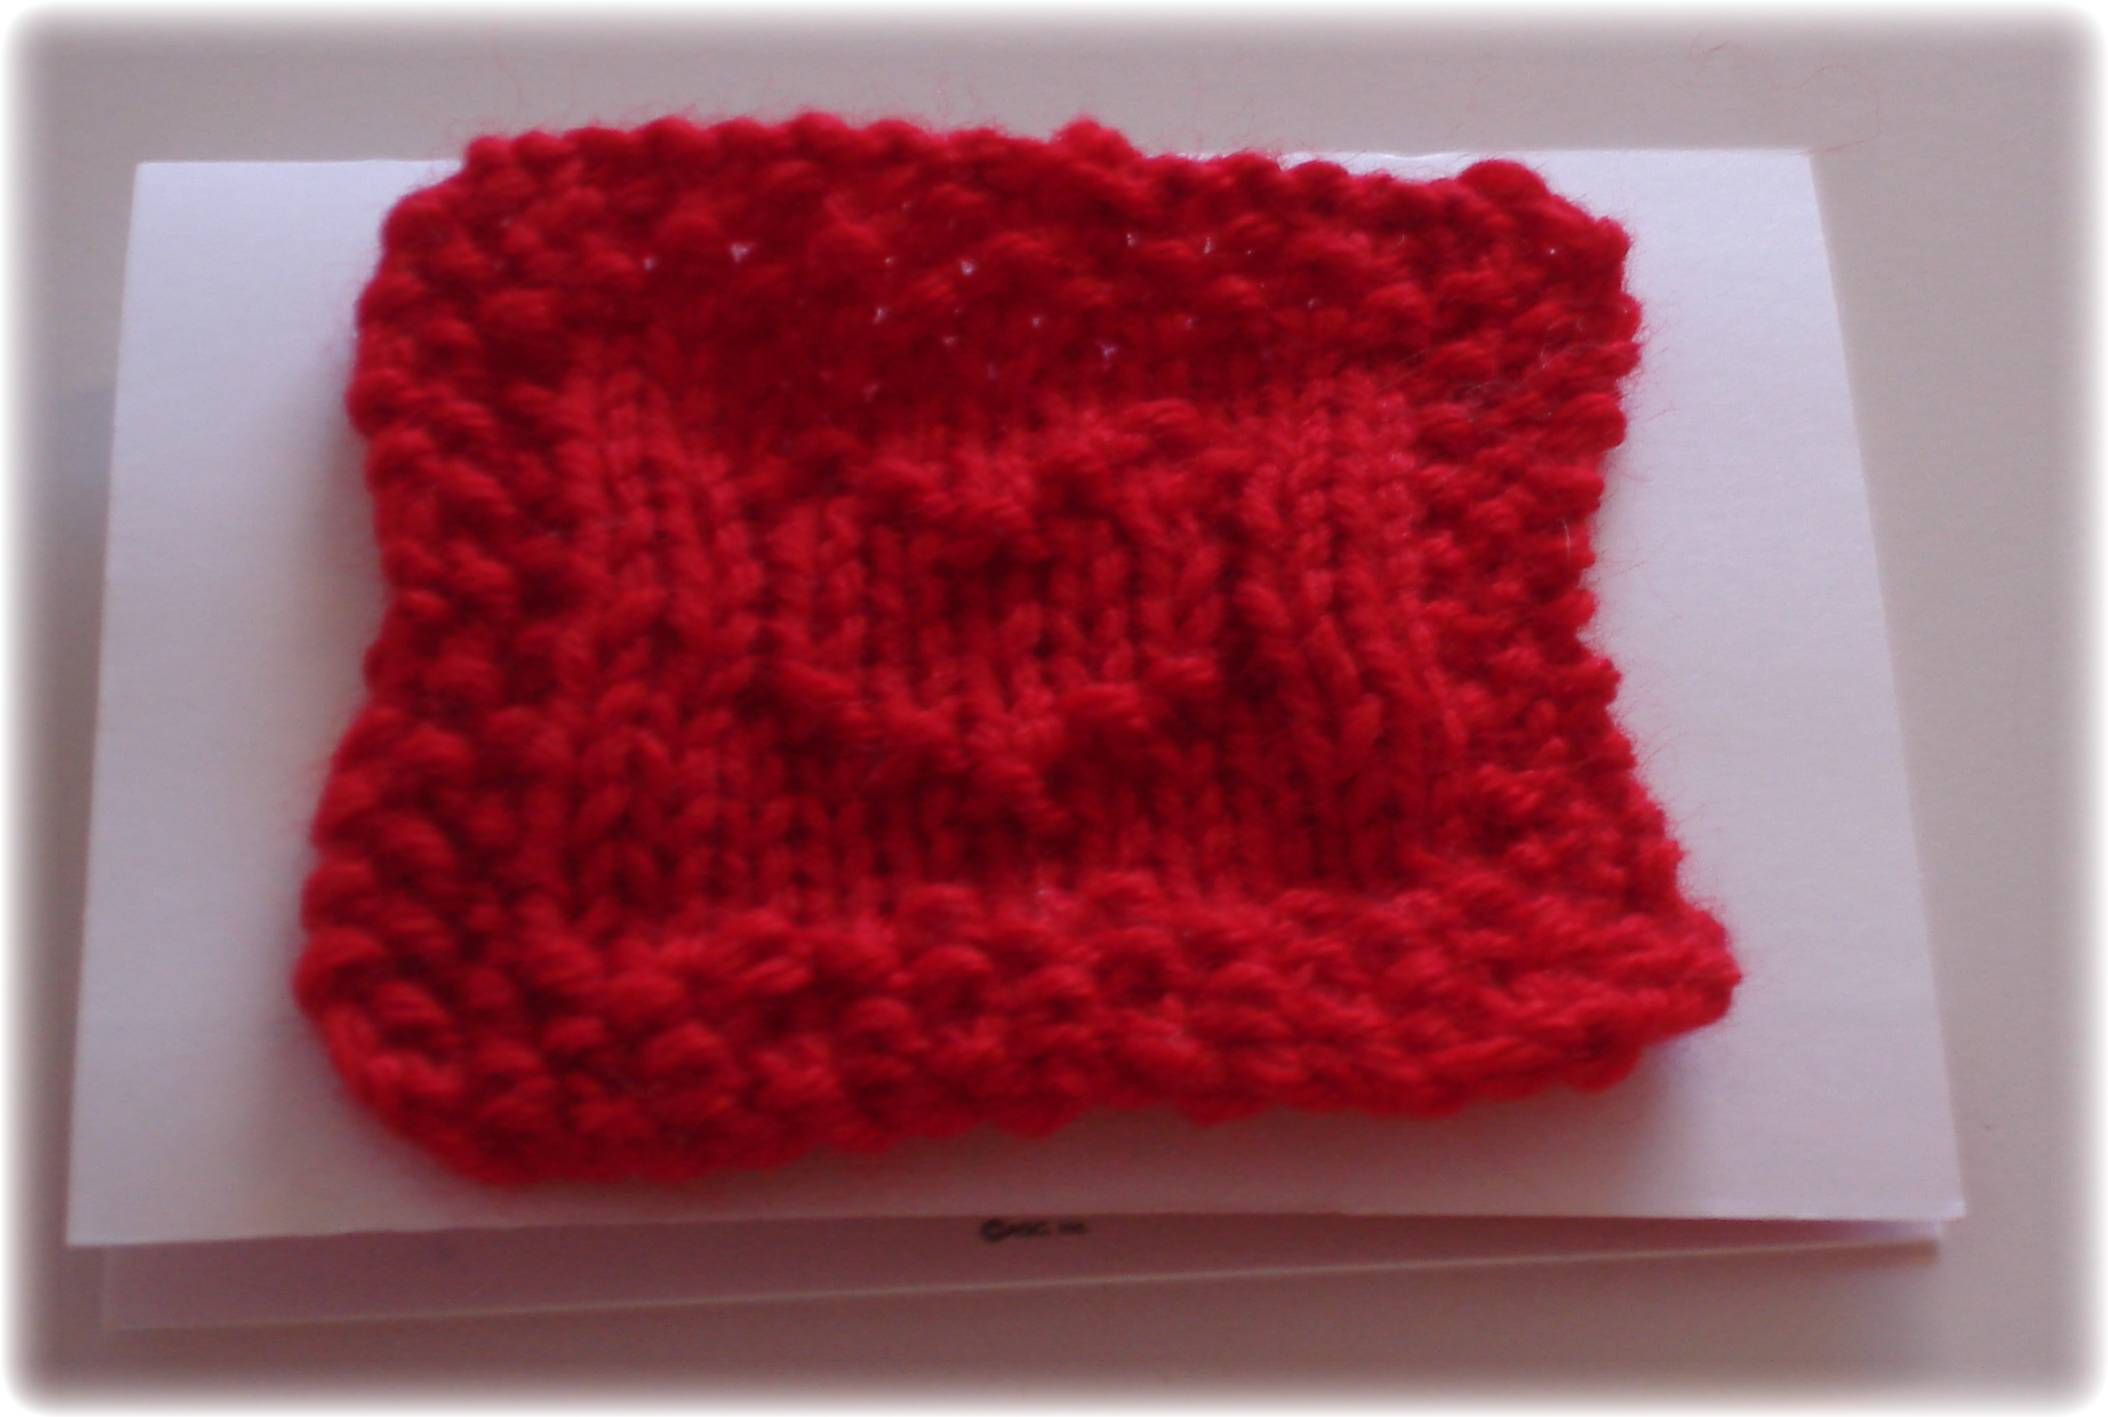 Heart Shaped Dishcloth Knitting Pattern Knit A Heart In 15 Minutes For Valentines Day